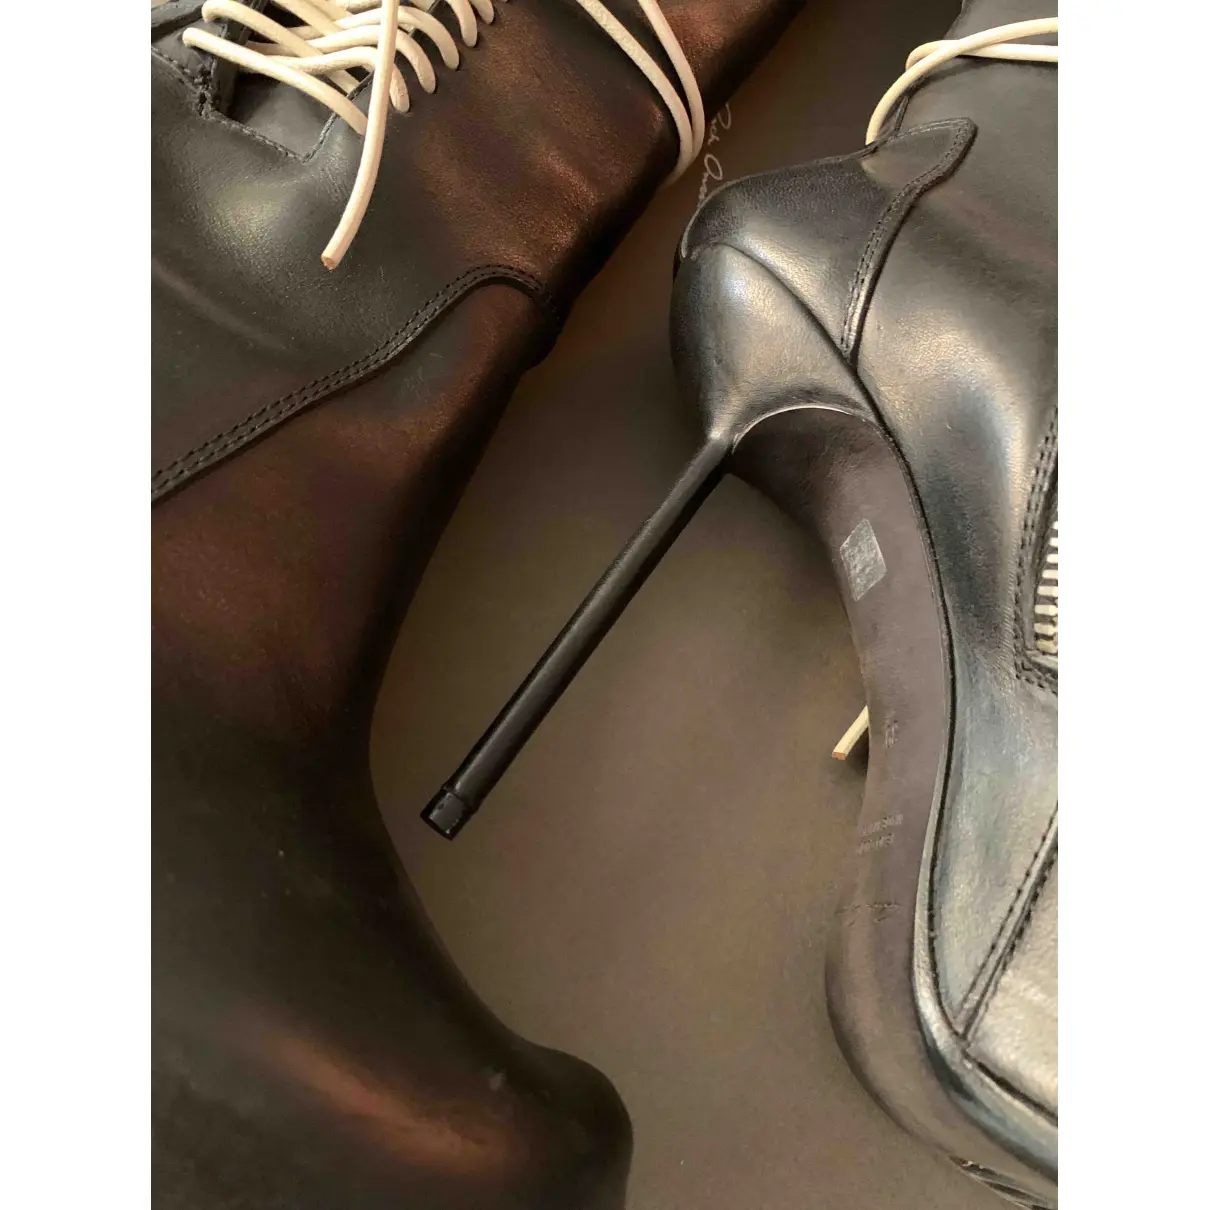 Buy Rick Owens Leather riding boots online